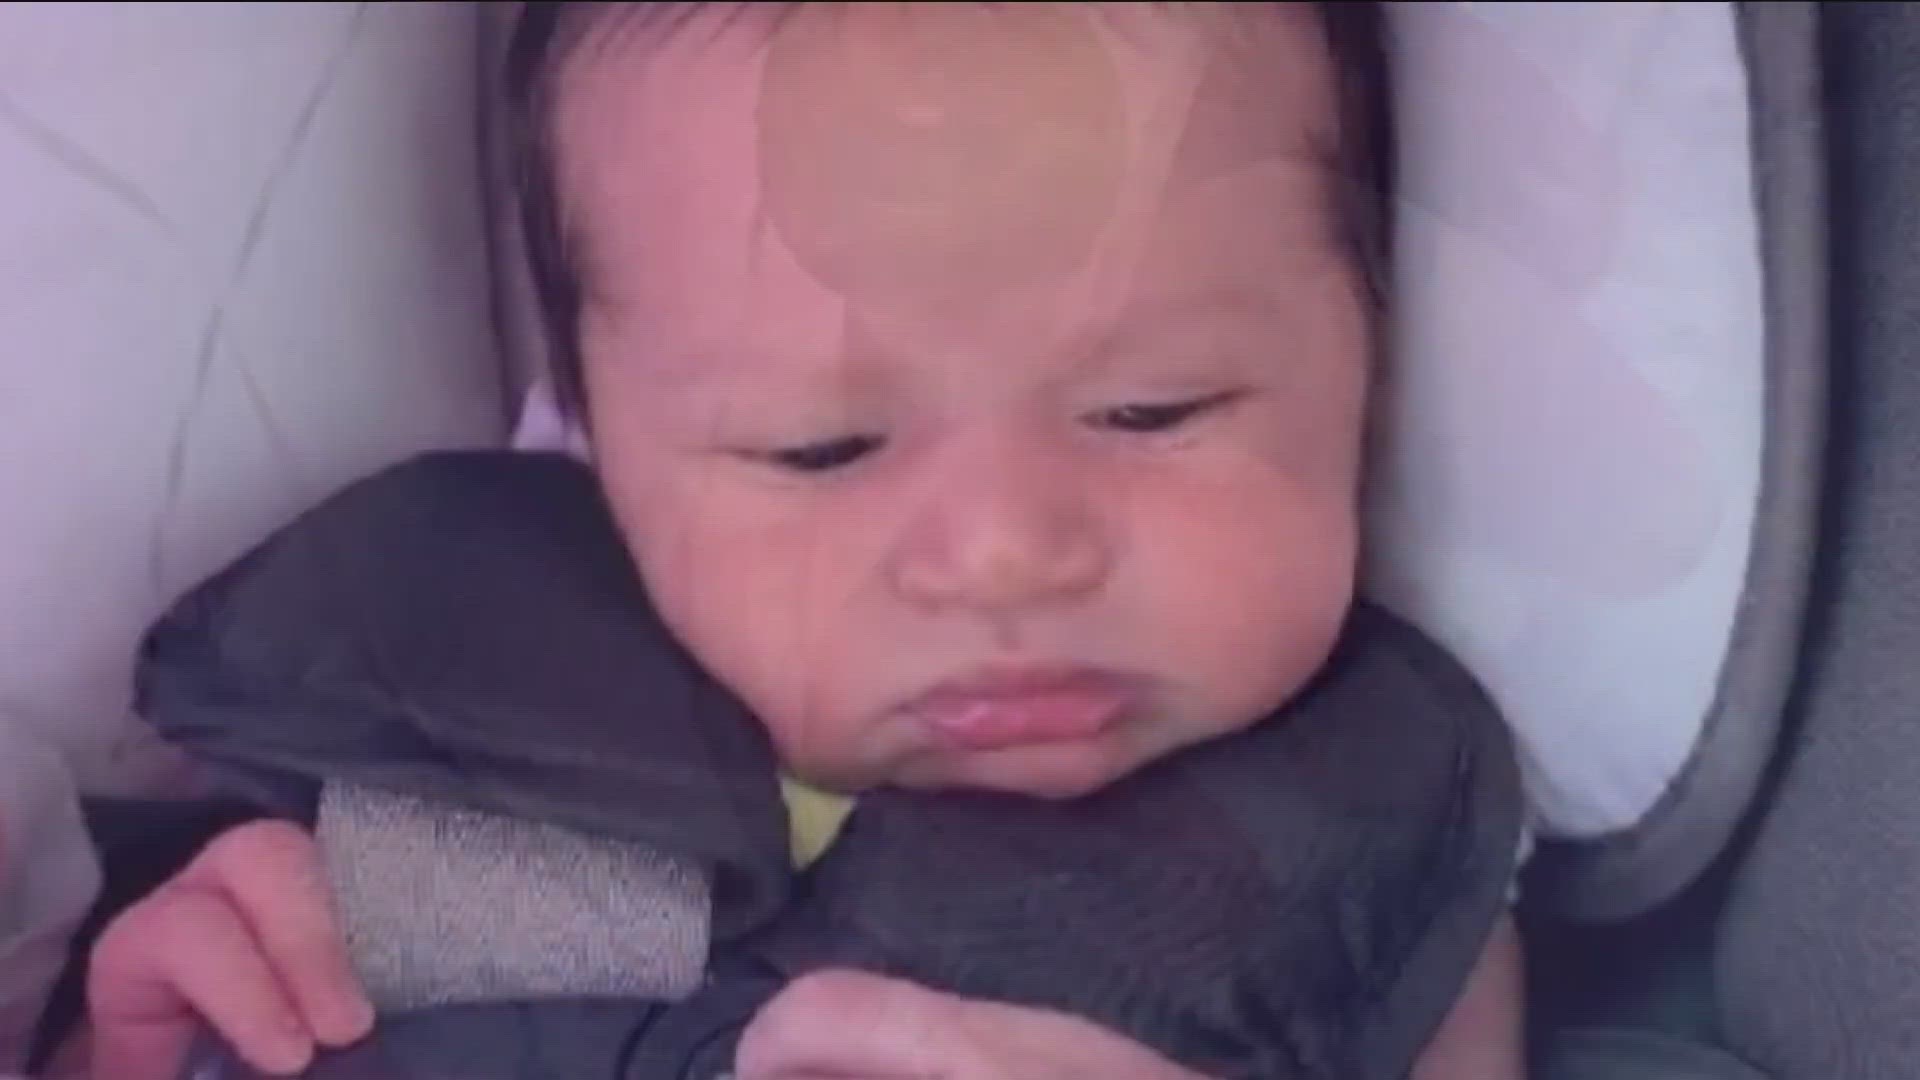 The newborn baby was abandoned in June 2019 after a family called 911, claiming they were hearing cries coming from the woods nearby.